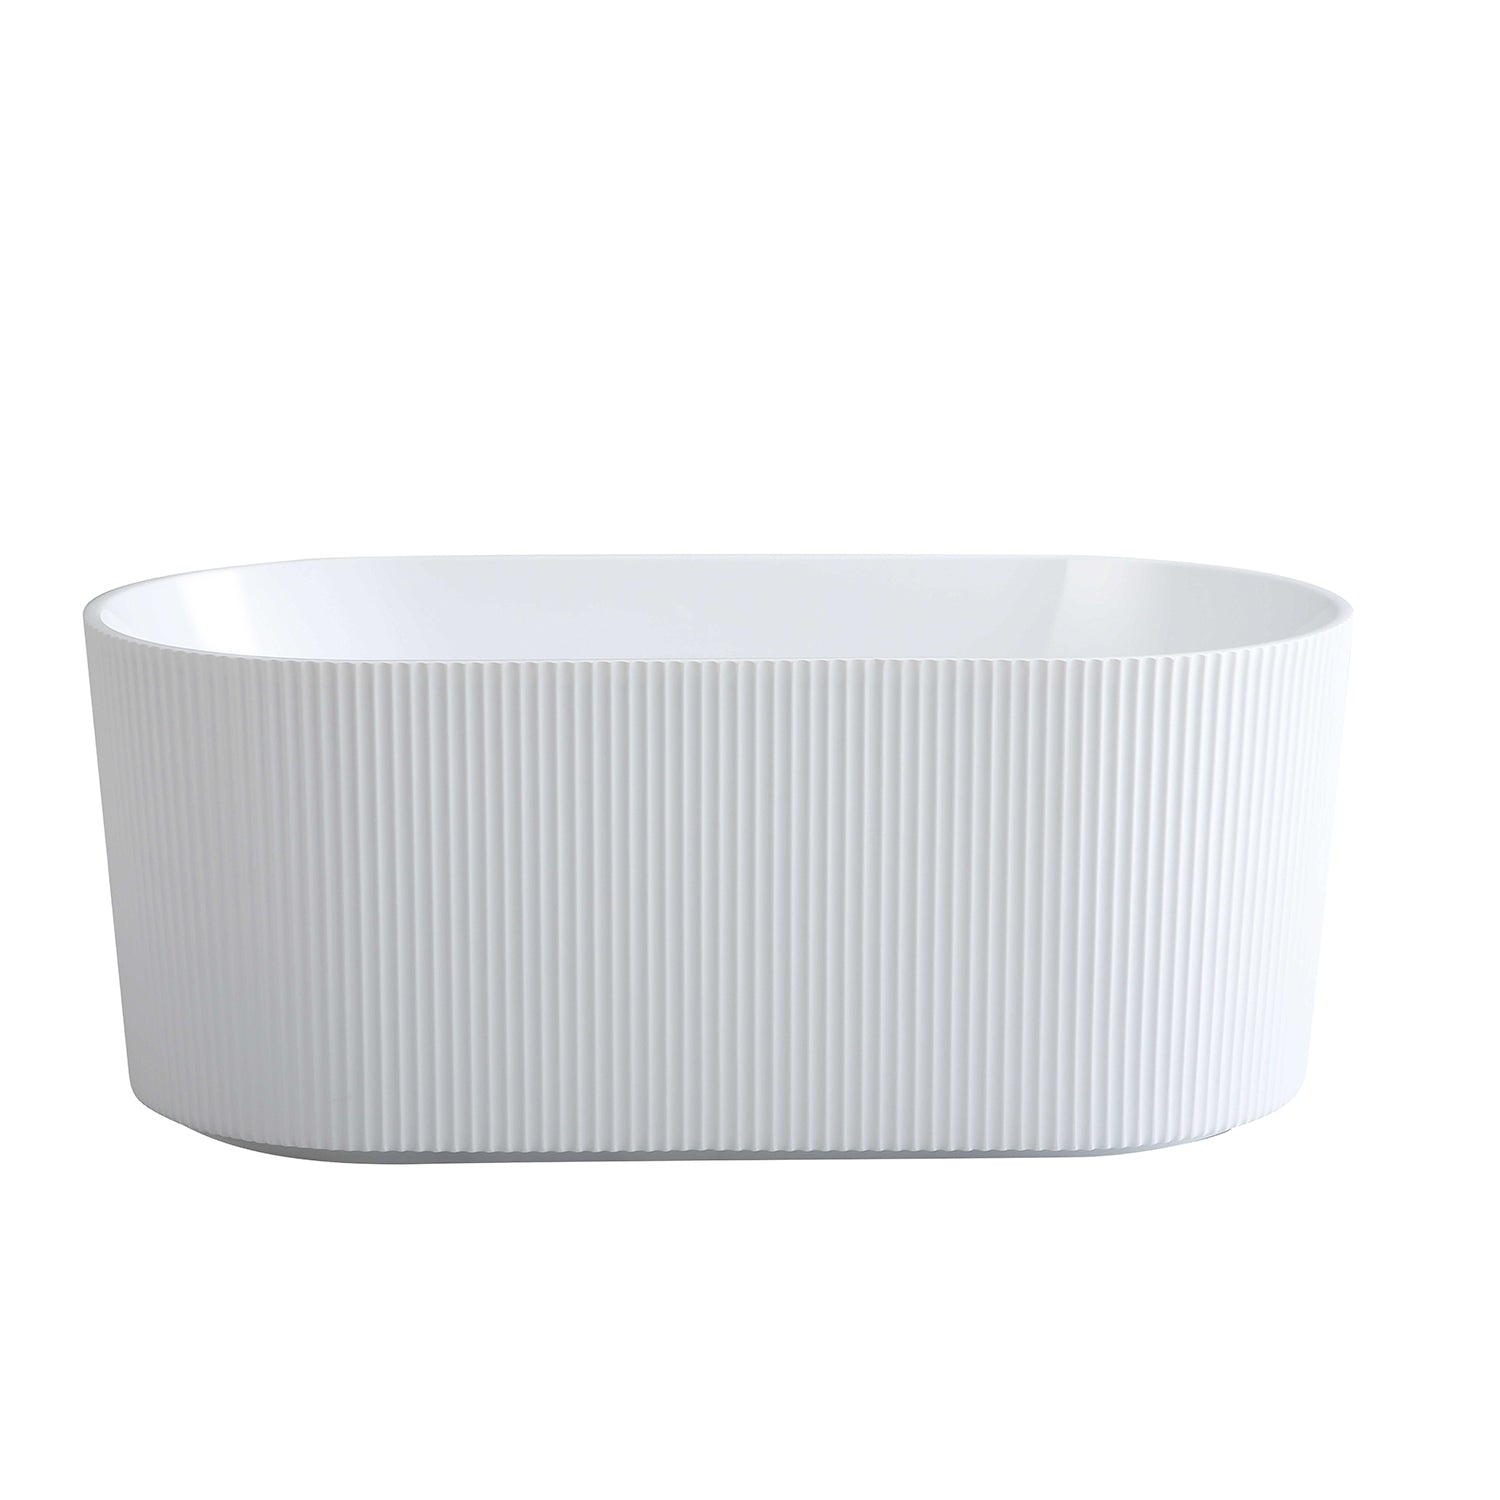 CETO ALLY GROOVE OVAL FREESTANDING BATH GLOSS WHITE (AVAILABLE IN 1500MM AND 1700MM)